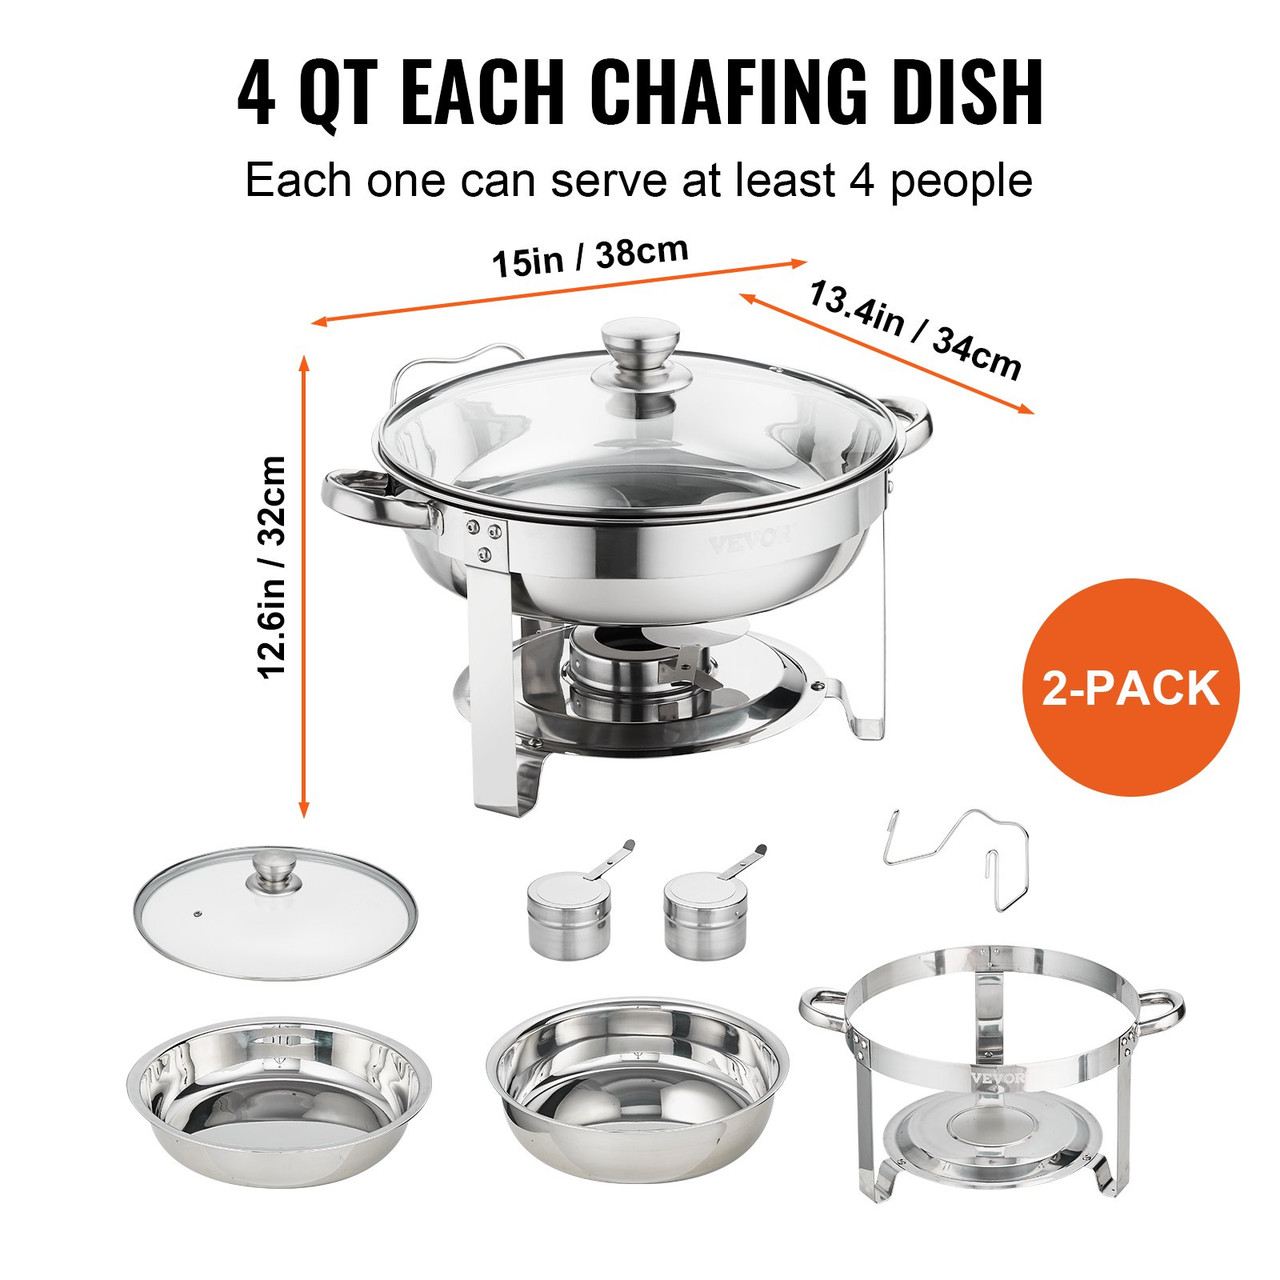 2-Pack Round Chafing Dish Set with Full-Size 4Qt Pan Glass Lid Fuel Holder